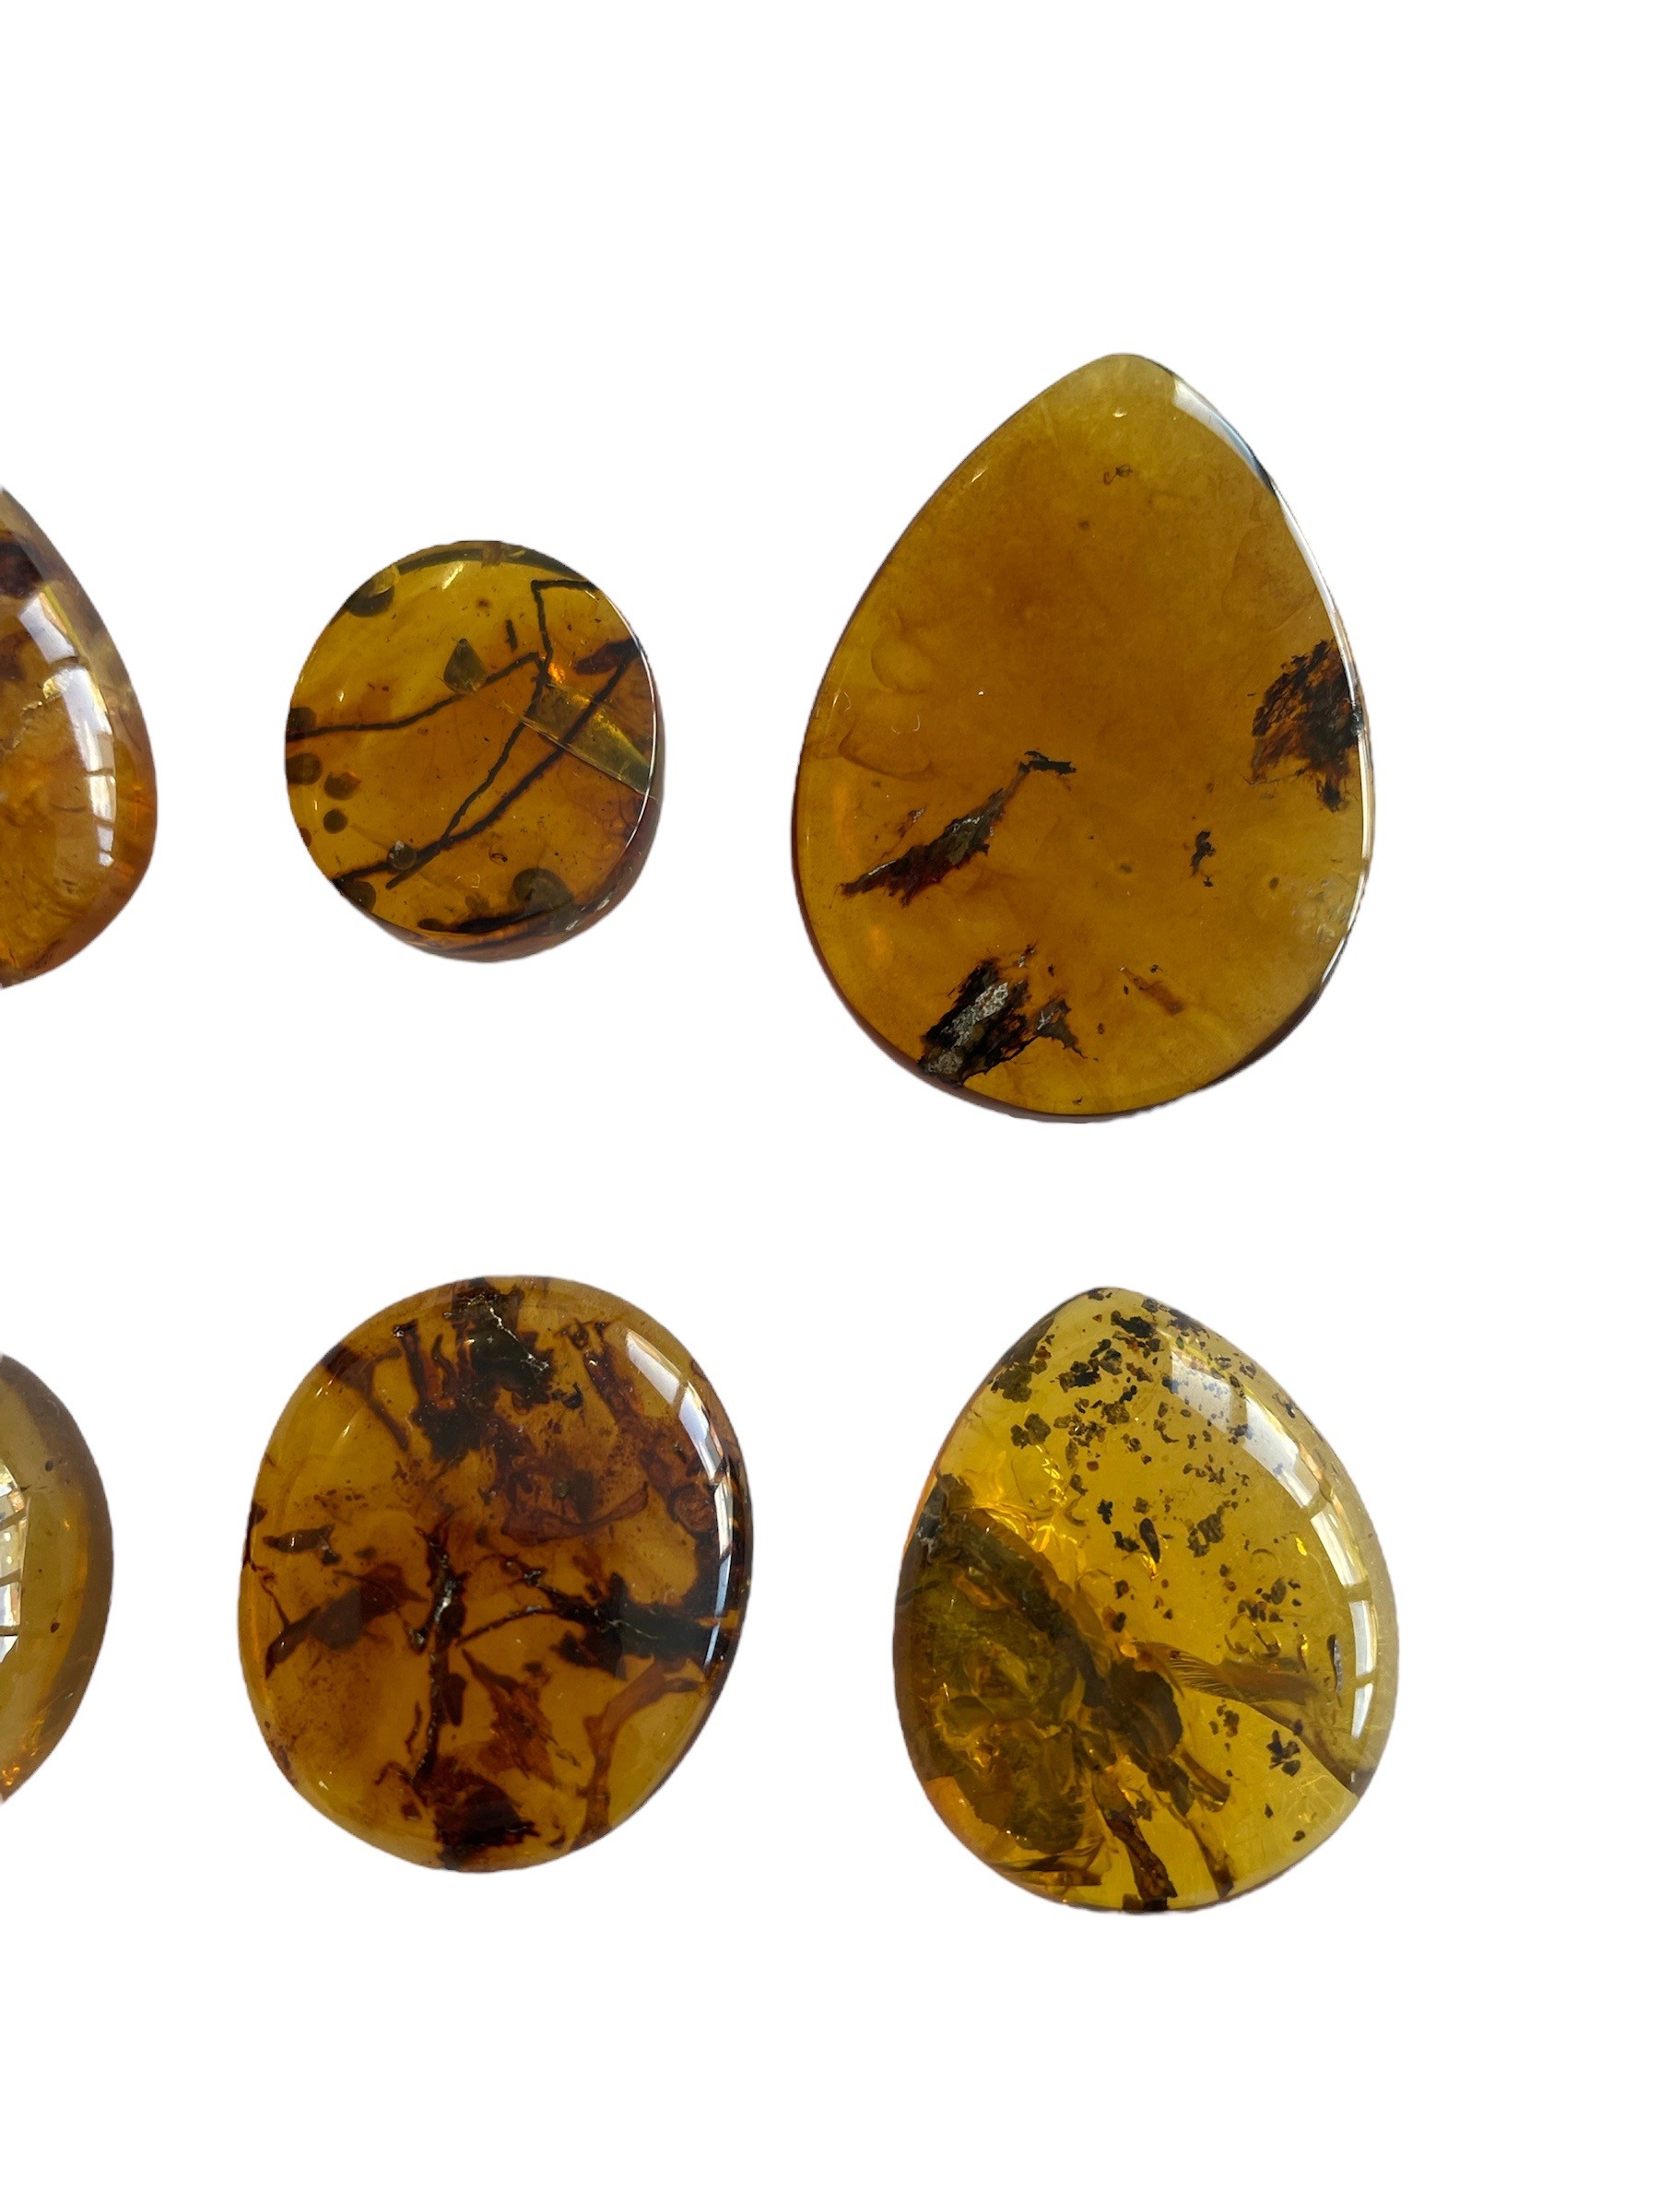 A GROUPING OF PLANT FOSSILS IN DINOSAUR AGED BURMESE AMBER A fantastic grouping of 12 botanical - Image 4 of 4